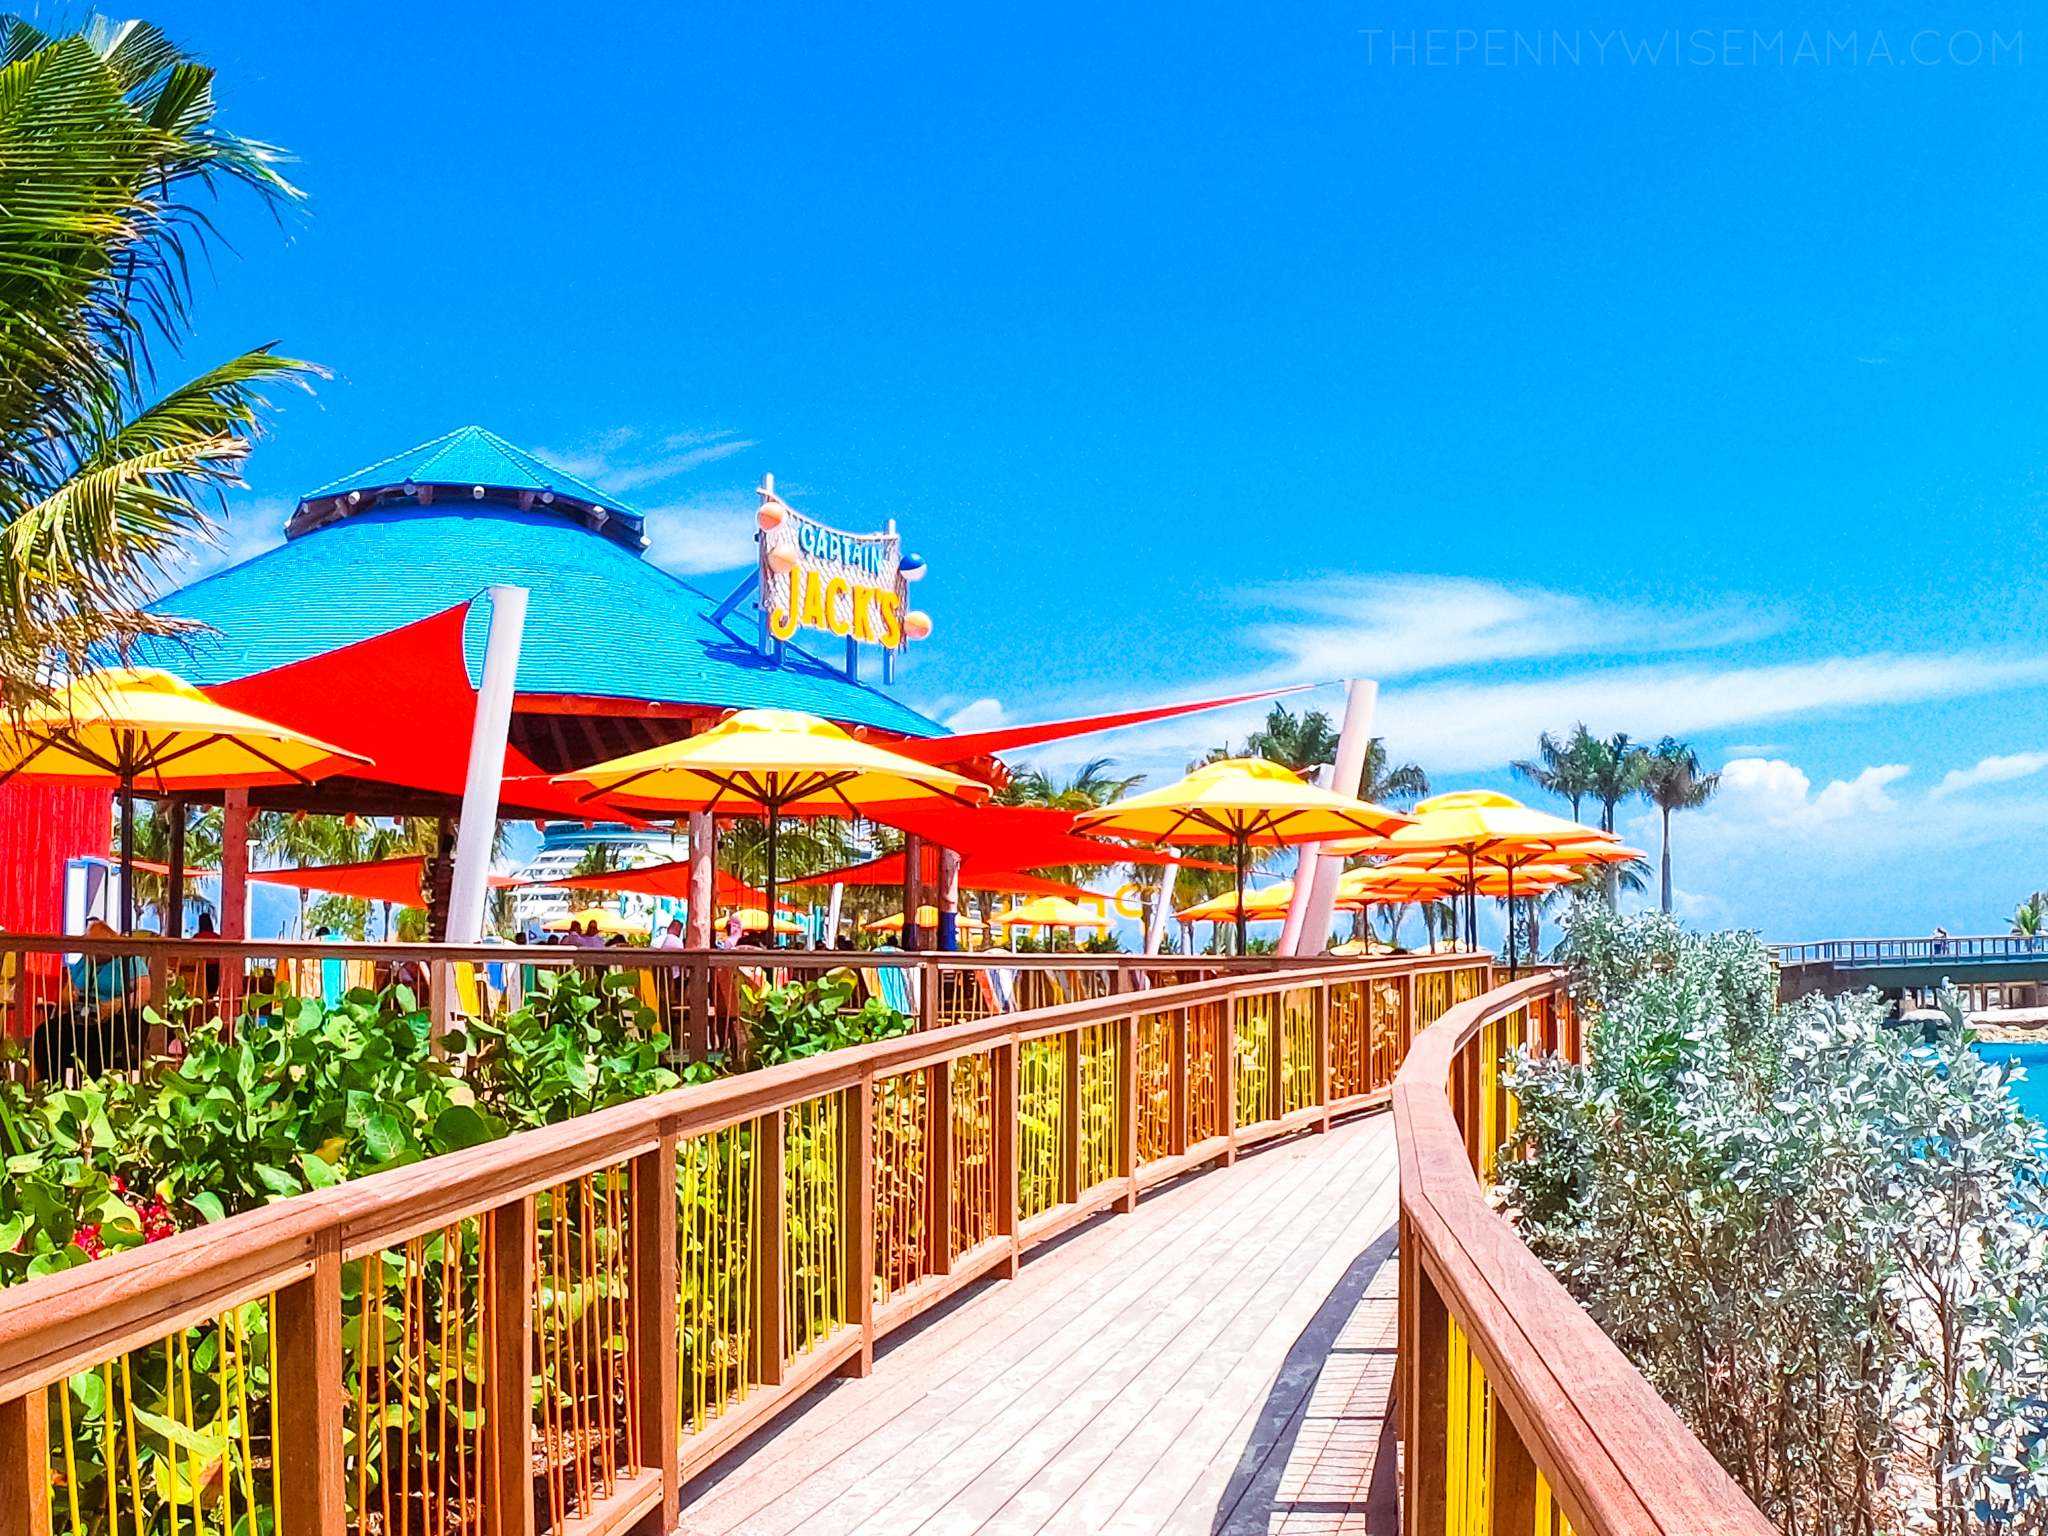 Captain Jack's at Perfect Day at CocoCay